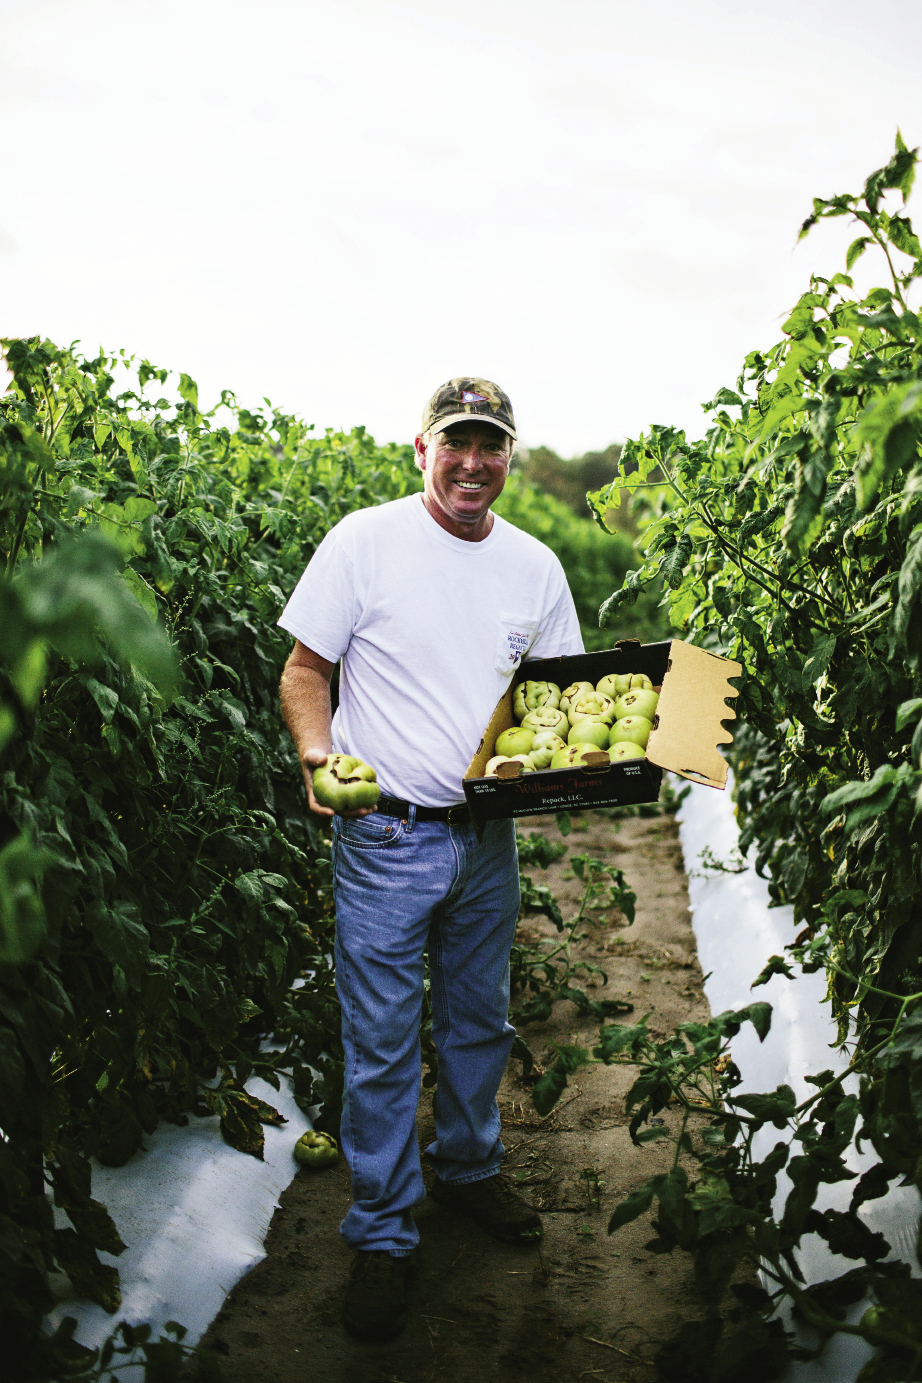 Shawn Thackeray has been growing his signature—and aptly named—“Wadmalaw Fuglies” at his farm on the island for 12 years. These are picked green for shipping to supermarket shelves. But don’t let their scarred looks fool you: Fuglies have a mild, sweet flavor and are well-balanced with acidity. Thackeray also produces a bounty of other tomatoes, including these colorful heirloom cherries.